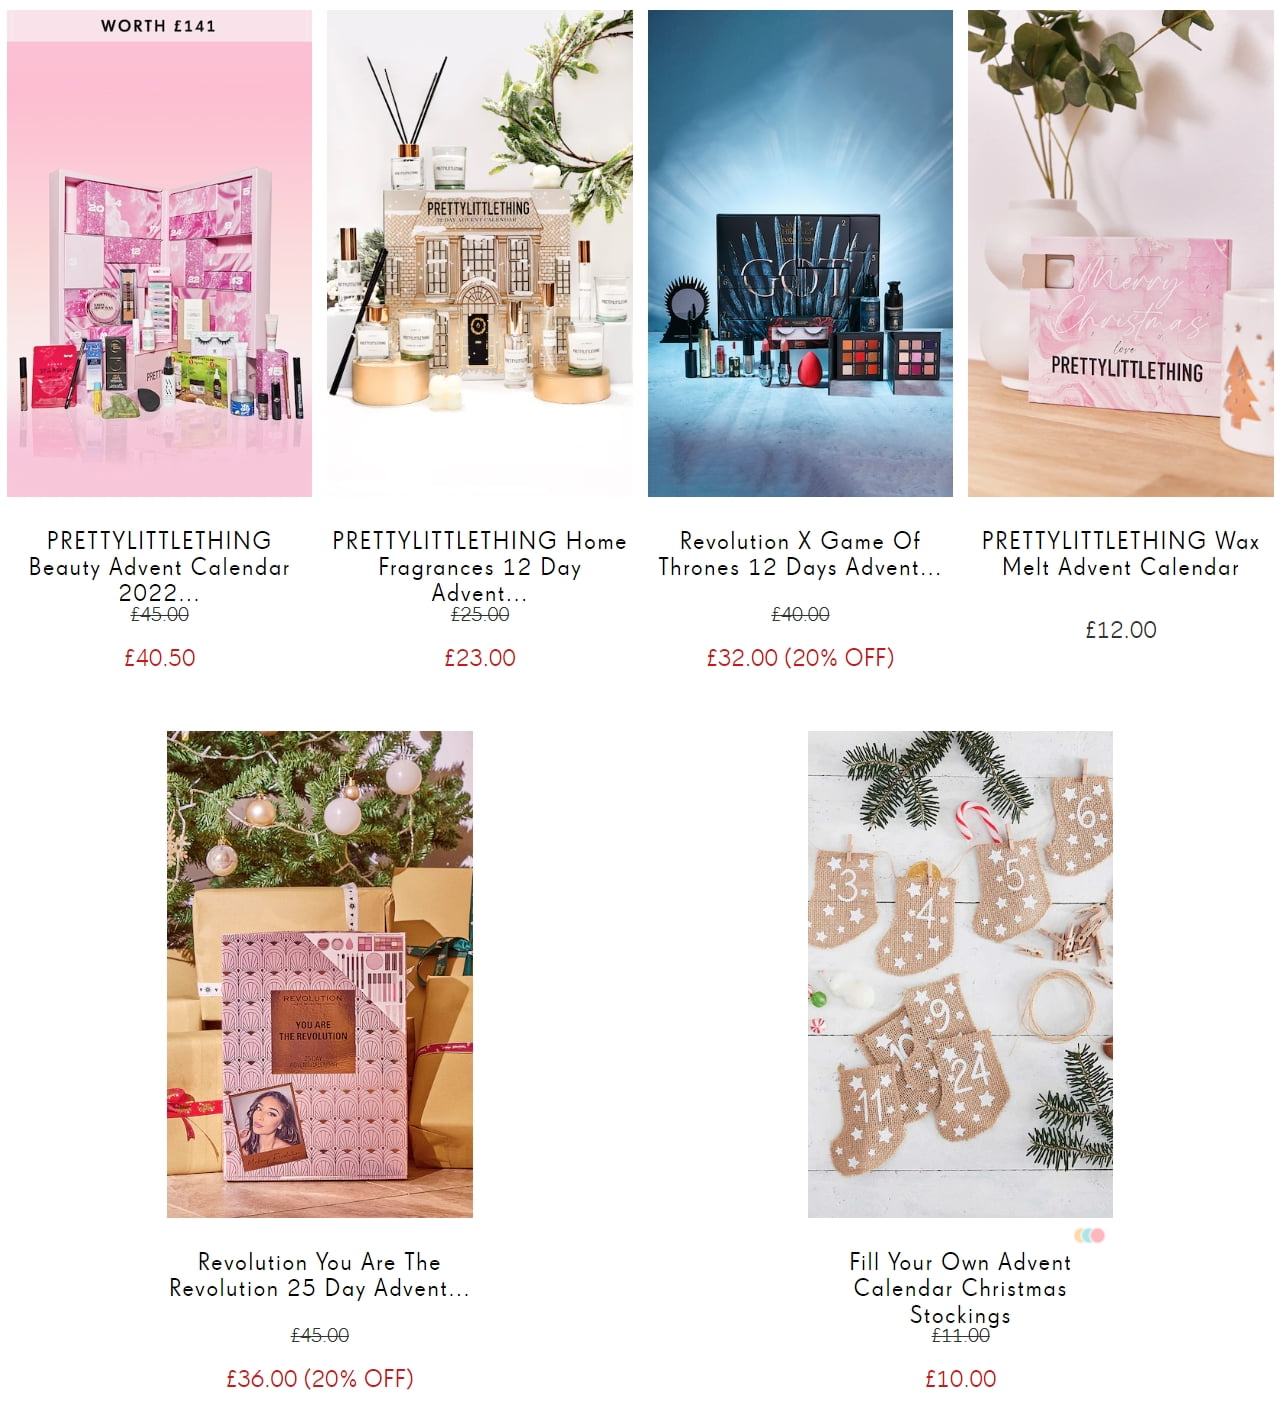 Up to 20% advent calendars at PrettyLittleThing